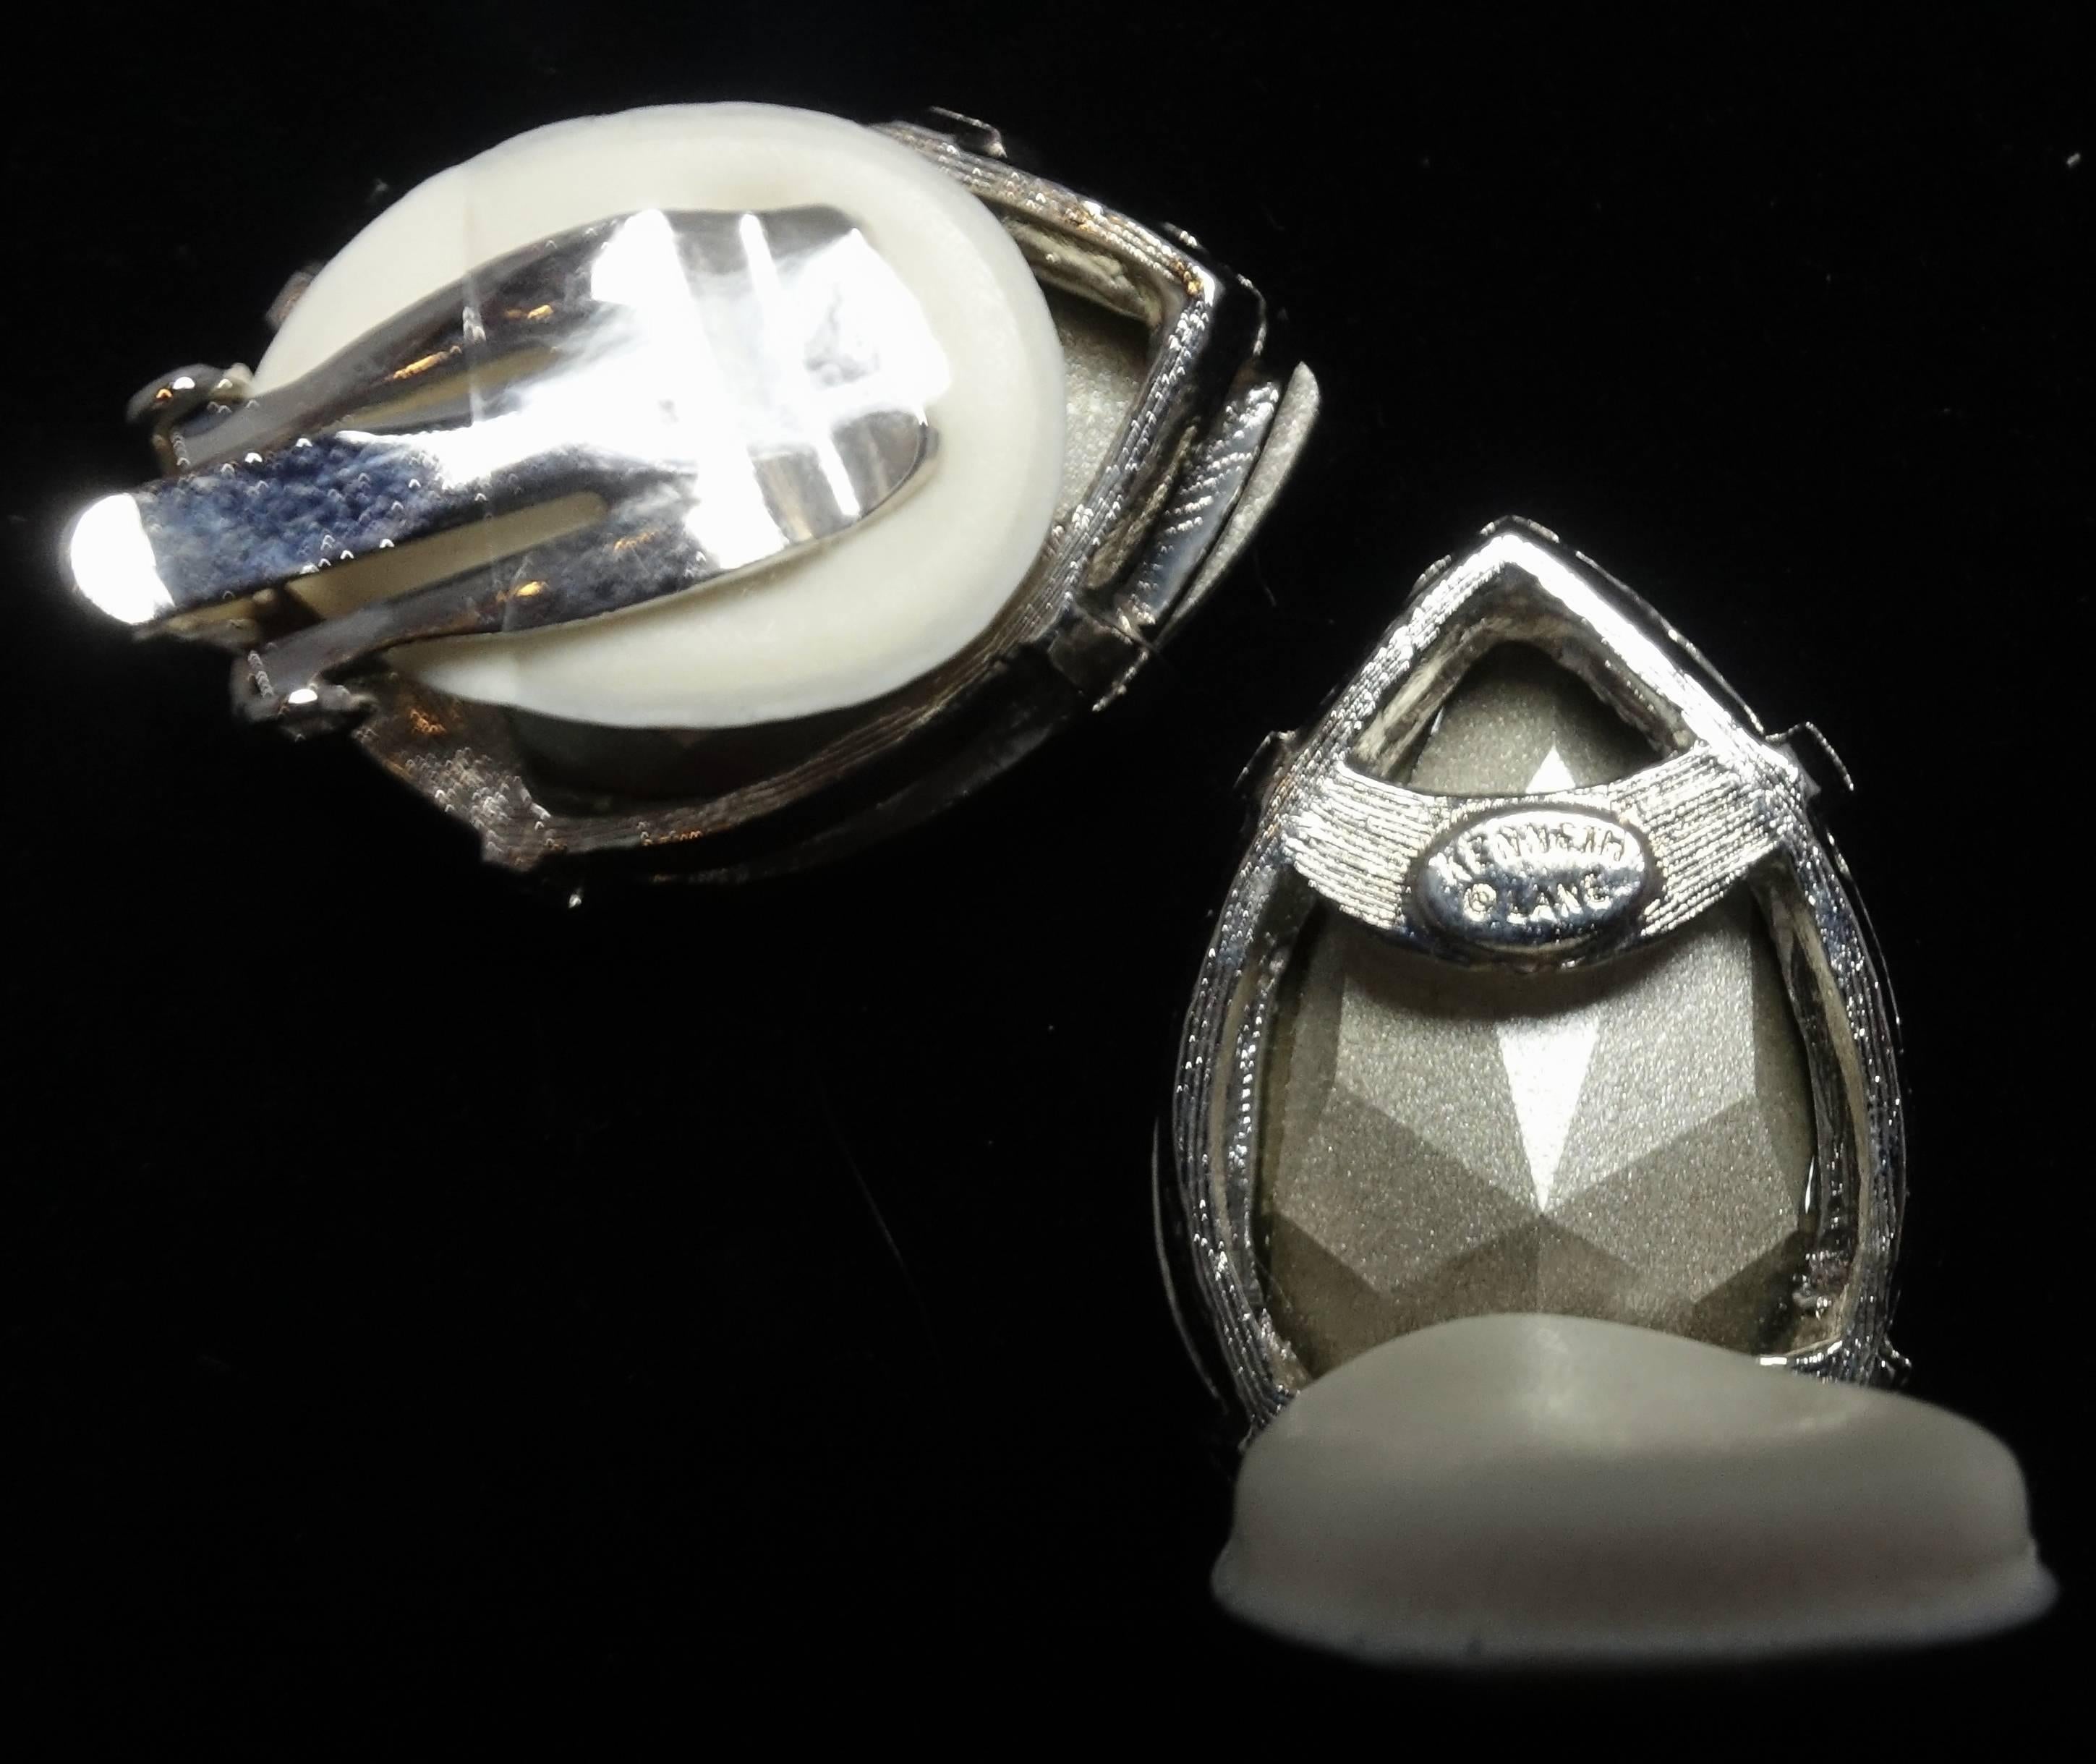 These Kenneth Jay Lane clip earrings feature a dazzling crystal teardrop in a silver tone setting.  The earrings measure 1-1/4” x 1” and are signed “Kenneth Lane”.  They are in excellent condition.